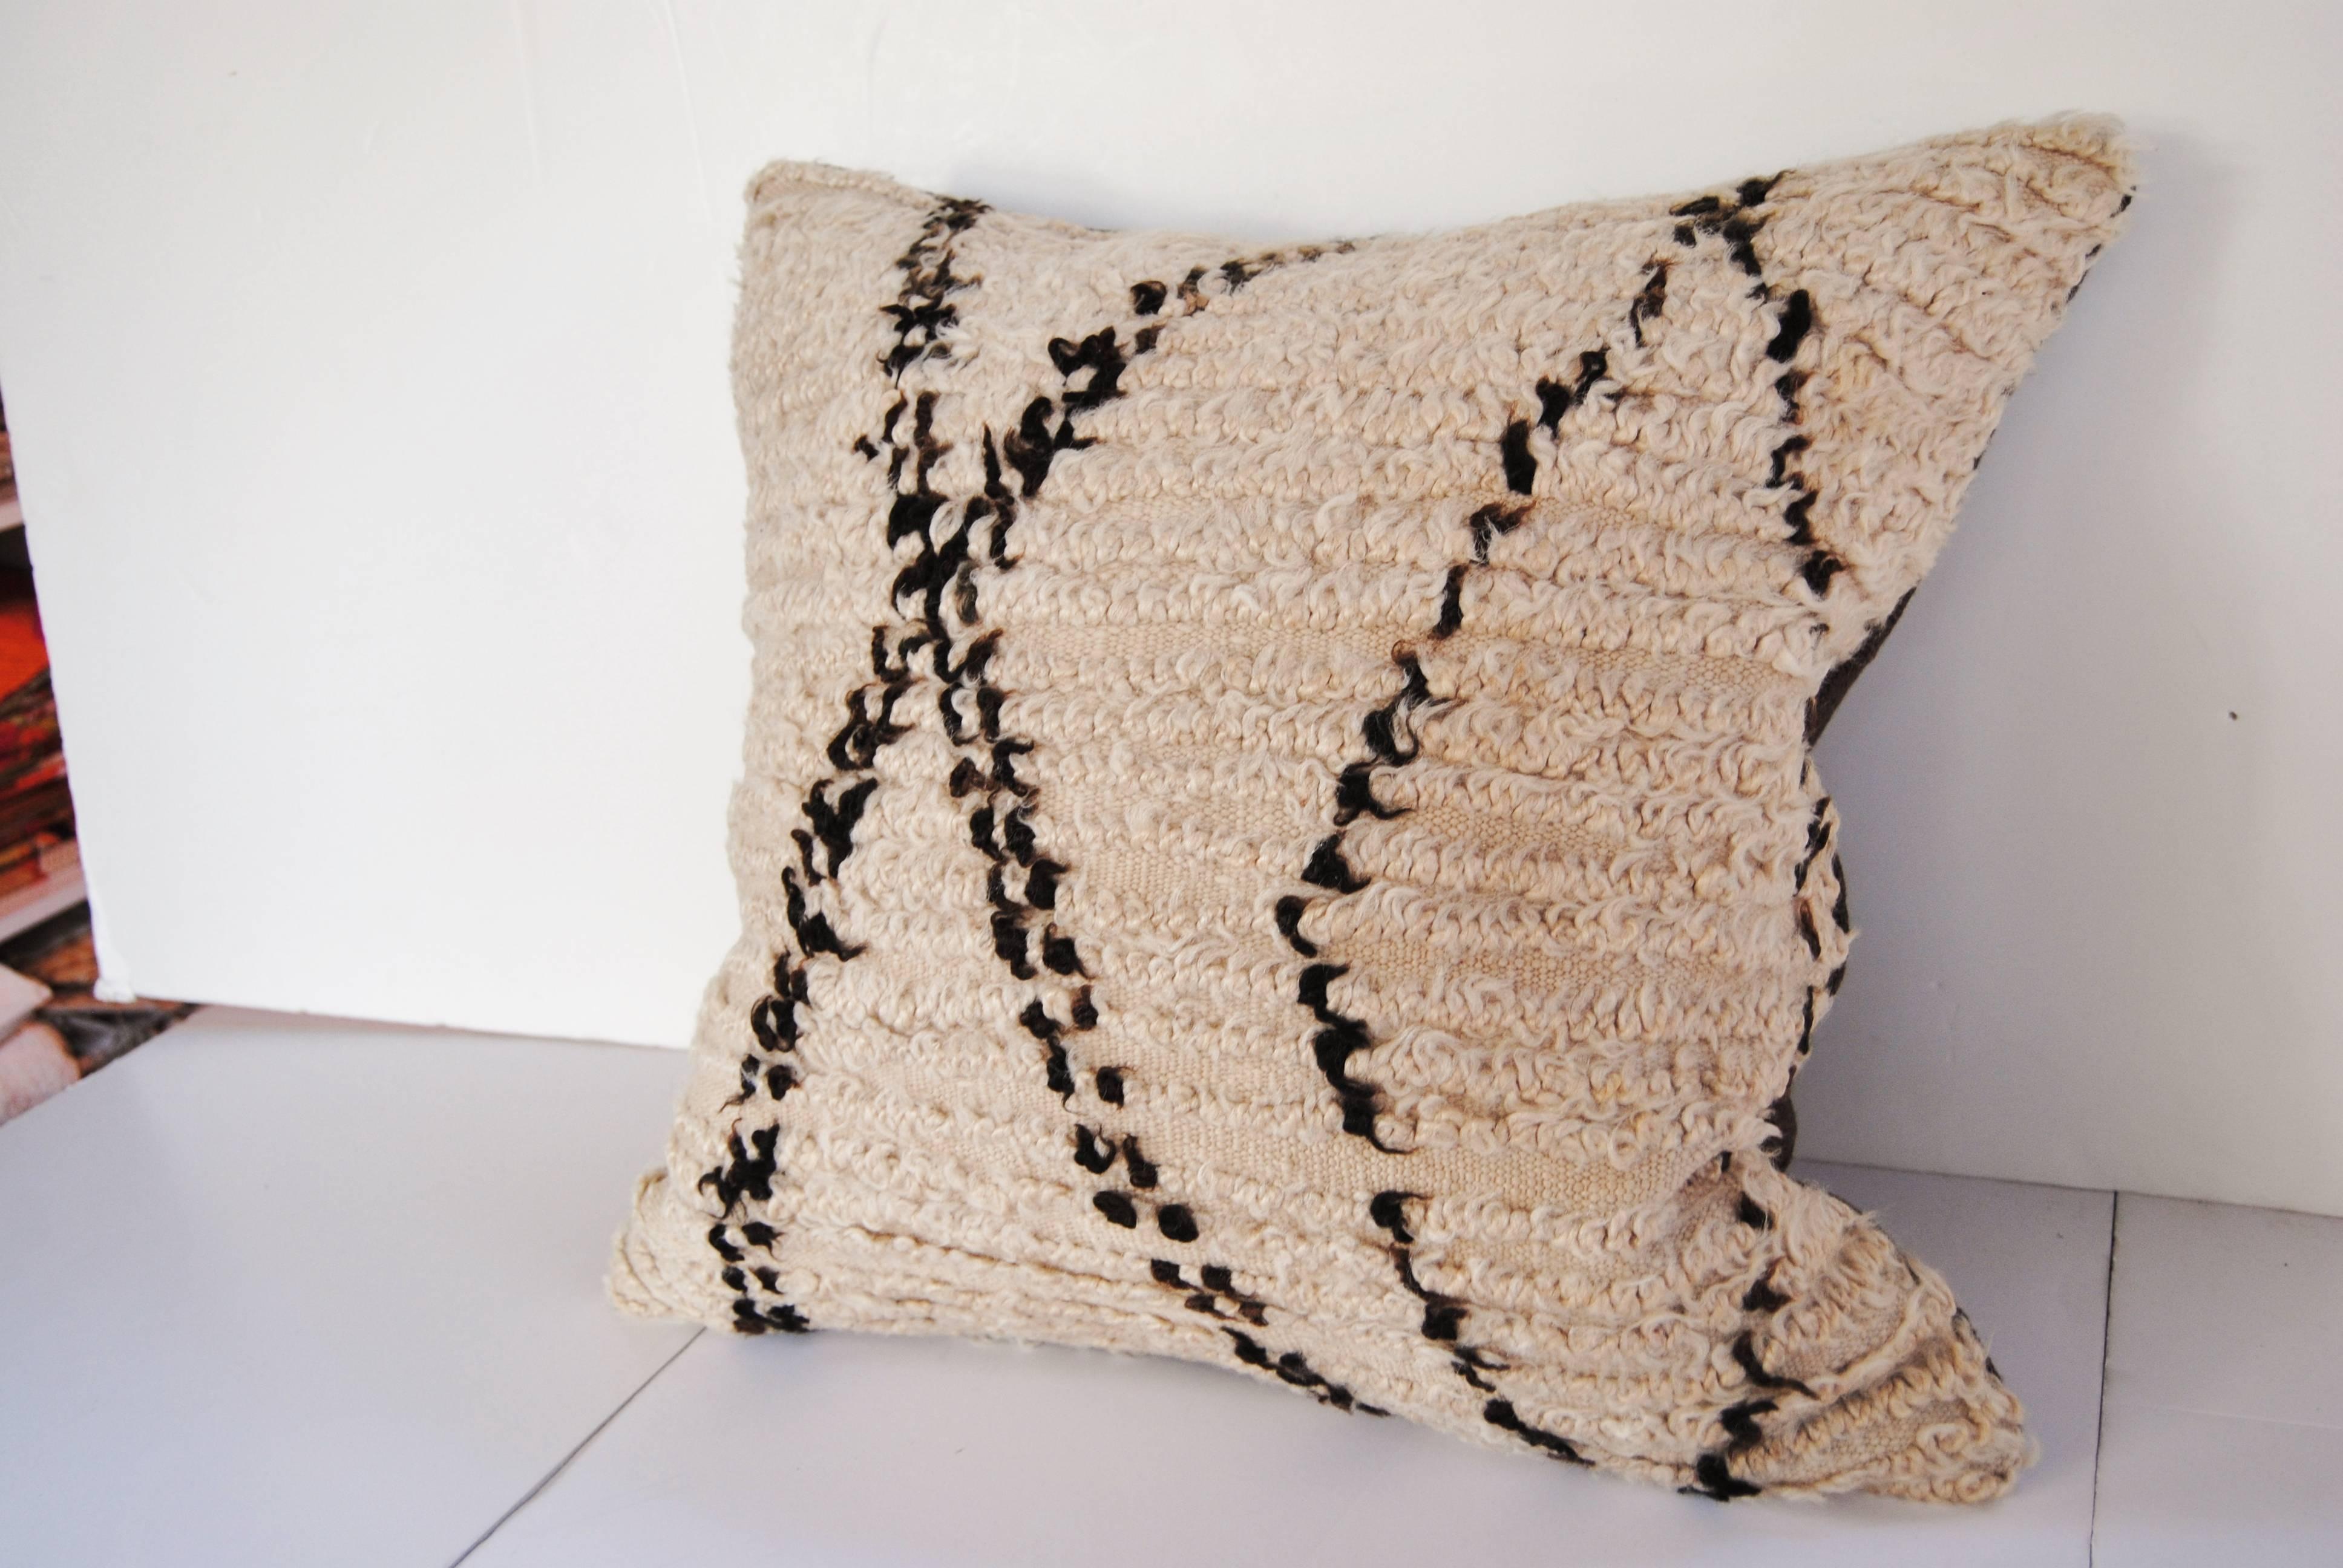 Custom pillow cut from a vintage hand-loomed wool Moroccan Beni Ouarain rug from the Atlas Mountains. Wool is soft and lustrous with natural color. Pillow is backed in dark brown linen, filled with an insert of 50/50 down and feathers and hand-sewn